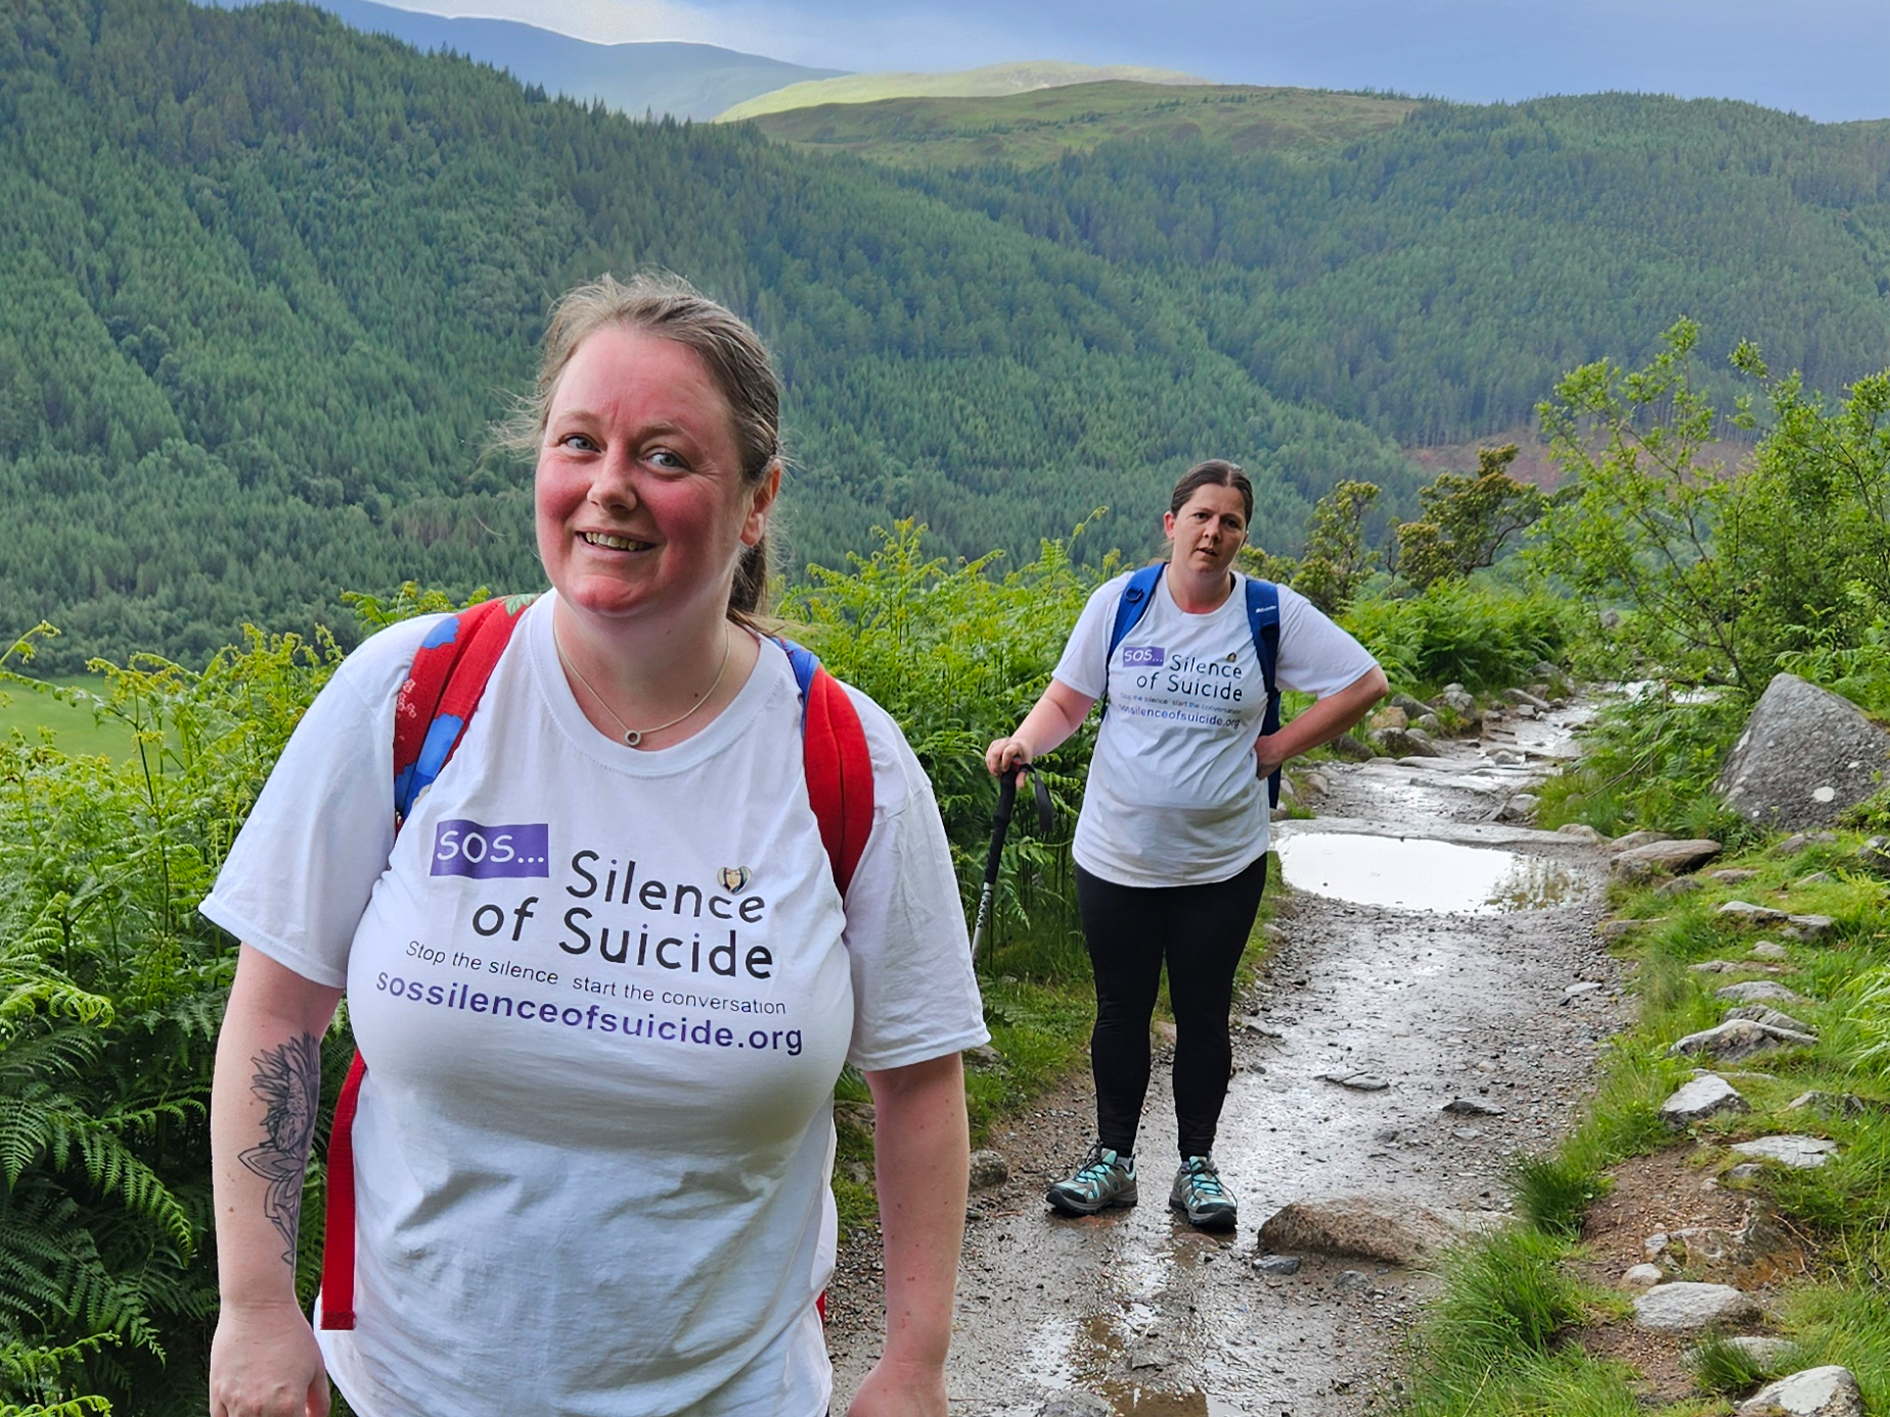 Joanne Quigley’s Fundraising Efforts Following Ben Nevis Hike for SOS Silence of Suicide